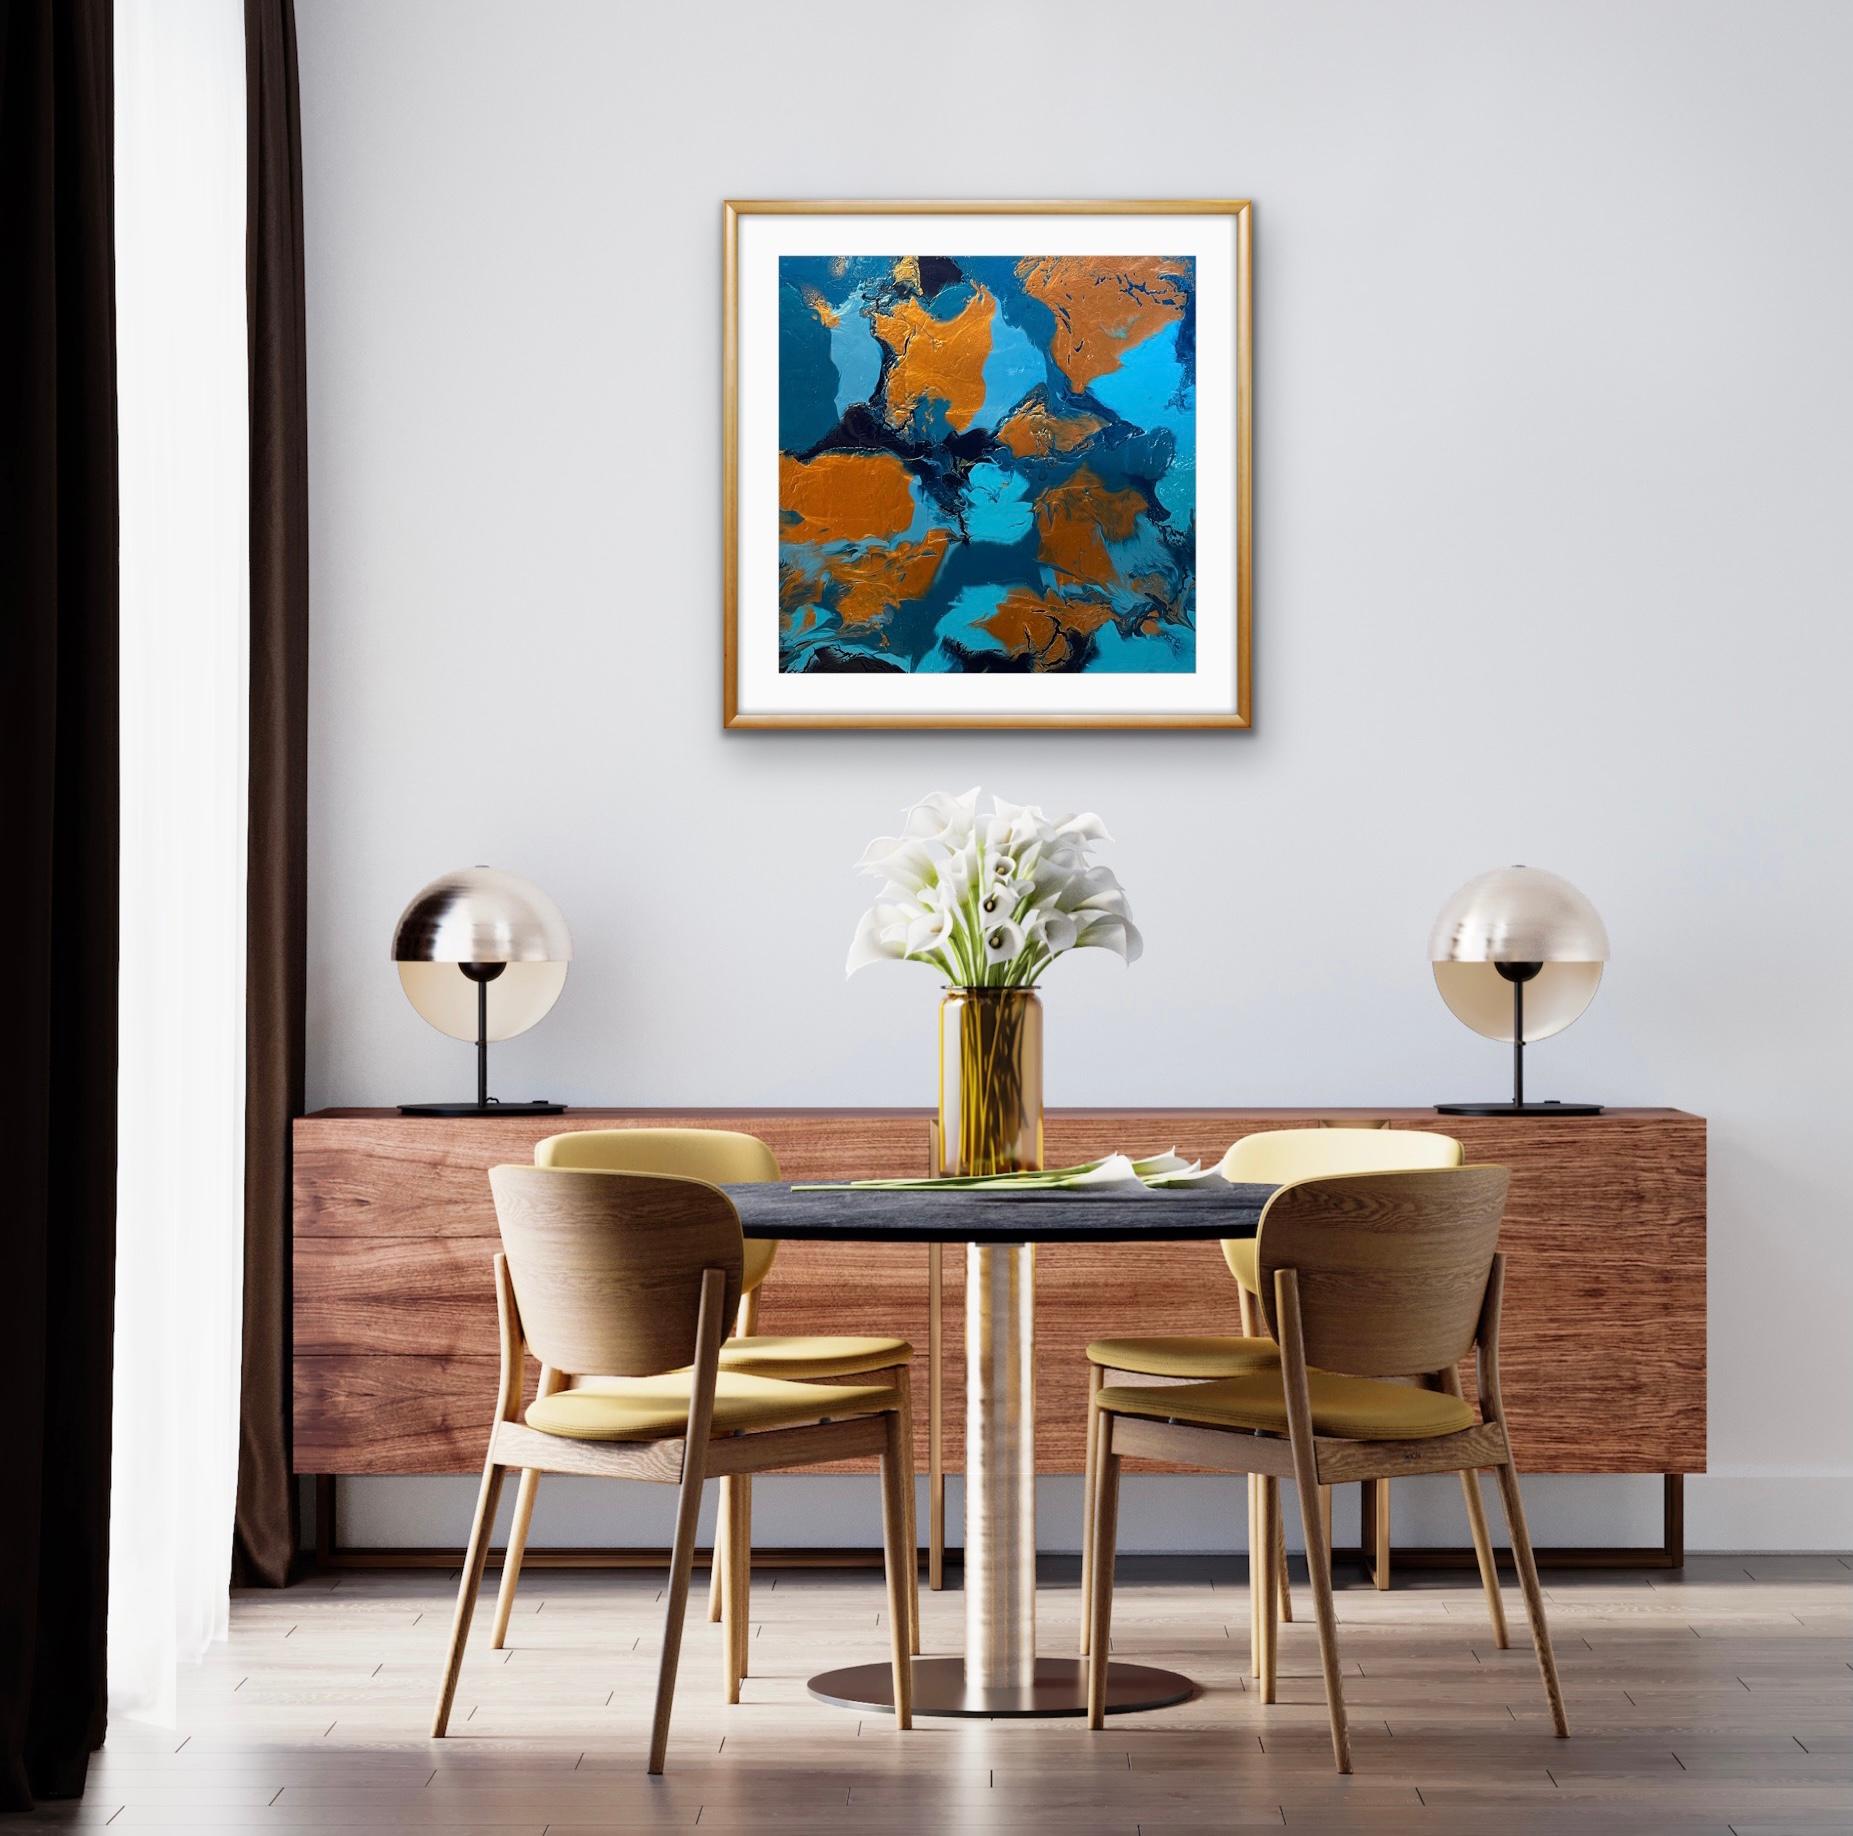 Copper Influence - Blue Interior Painting by Almas Kabani